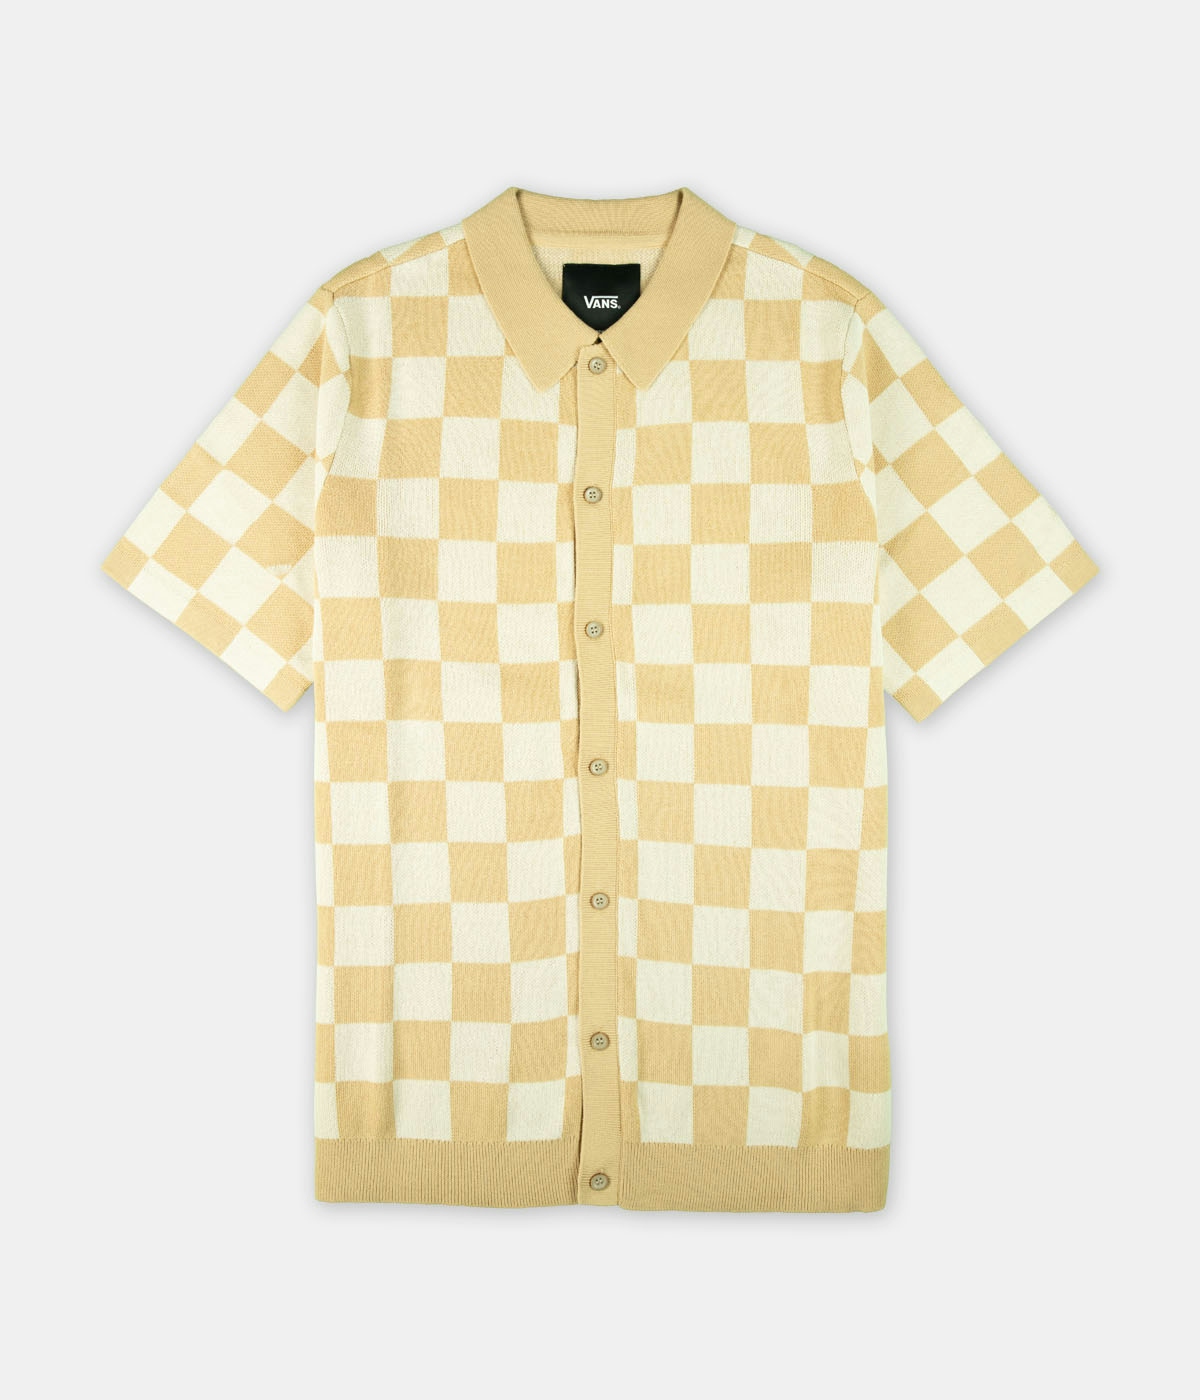 Vans Checkerboard Polo Sweater Oatmeal/Taos Taupe 1